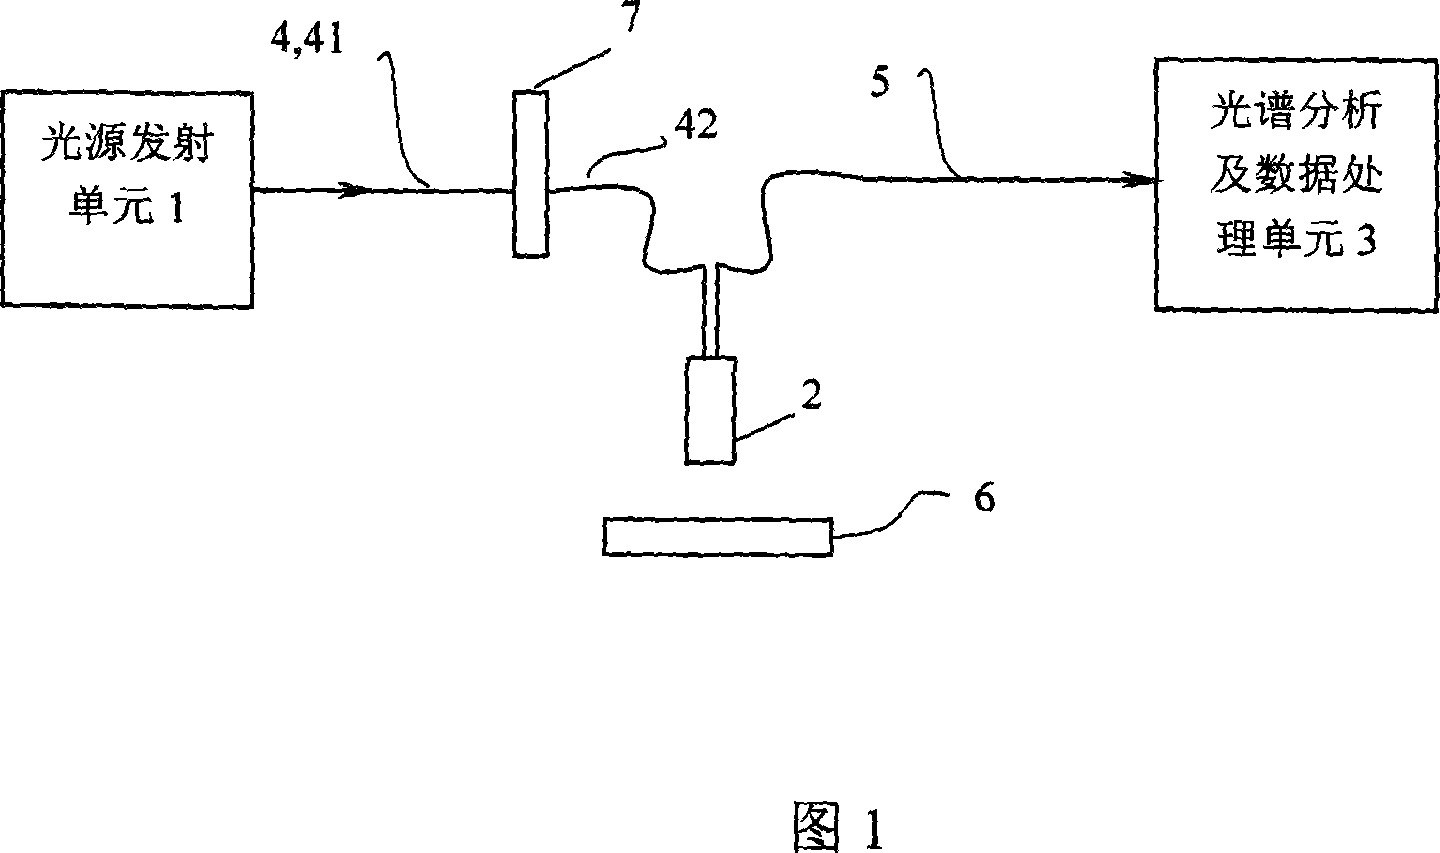 Optical detection device and working method for tissue of living body